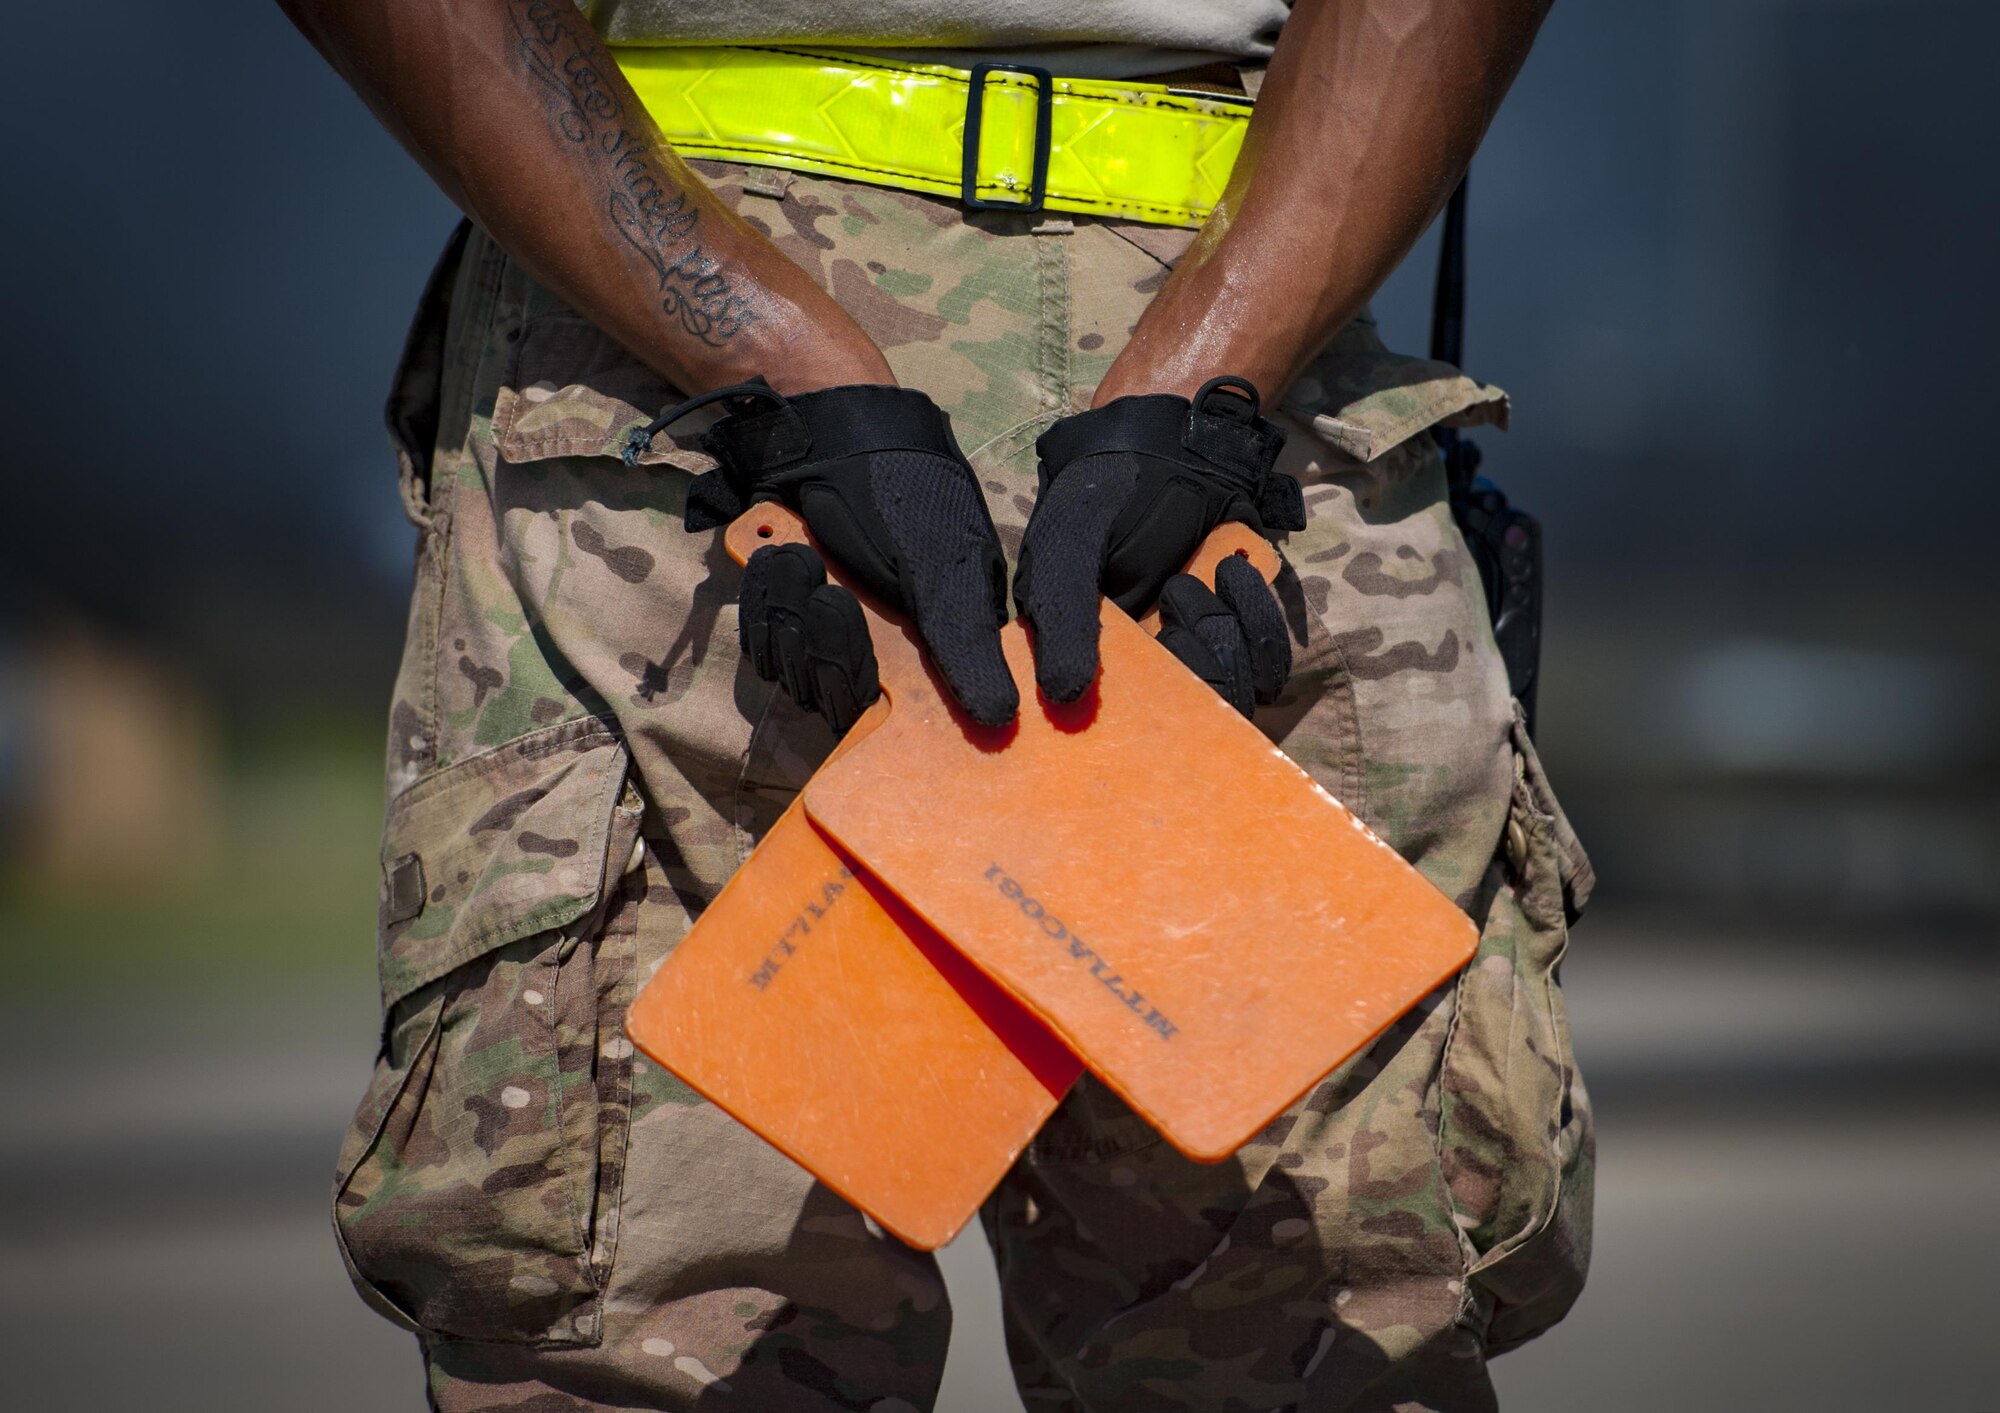 Senior Airman Tavaris Scott, 71st Rescue Squadron Aircraft Maintenance Unit crew chief, holds marshalling sticks prior to launching an HC-130J Combat King II, Aug. 17, 2017, at Moody Air Force Base, Ga. Maintainers perform various tasks prior to take-off such as pre-flight inspections, removing plugs and covers, repairing any problems found during crew pre-flight checks and marshalling the aircraft. (U.S. Air Force photo by Airman 1st Class Lauren M. Sprunk)